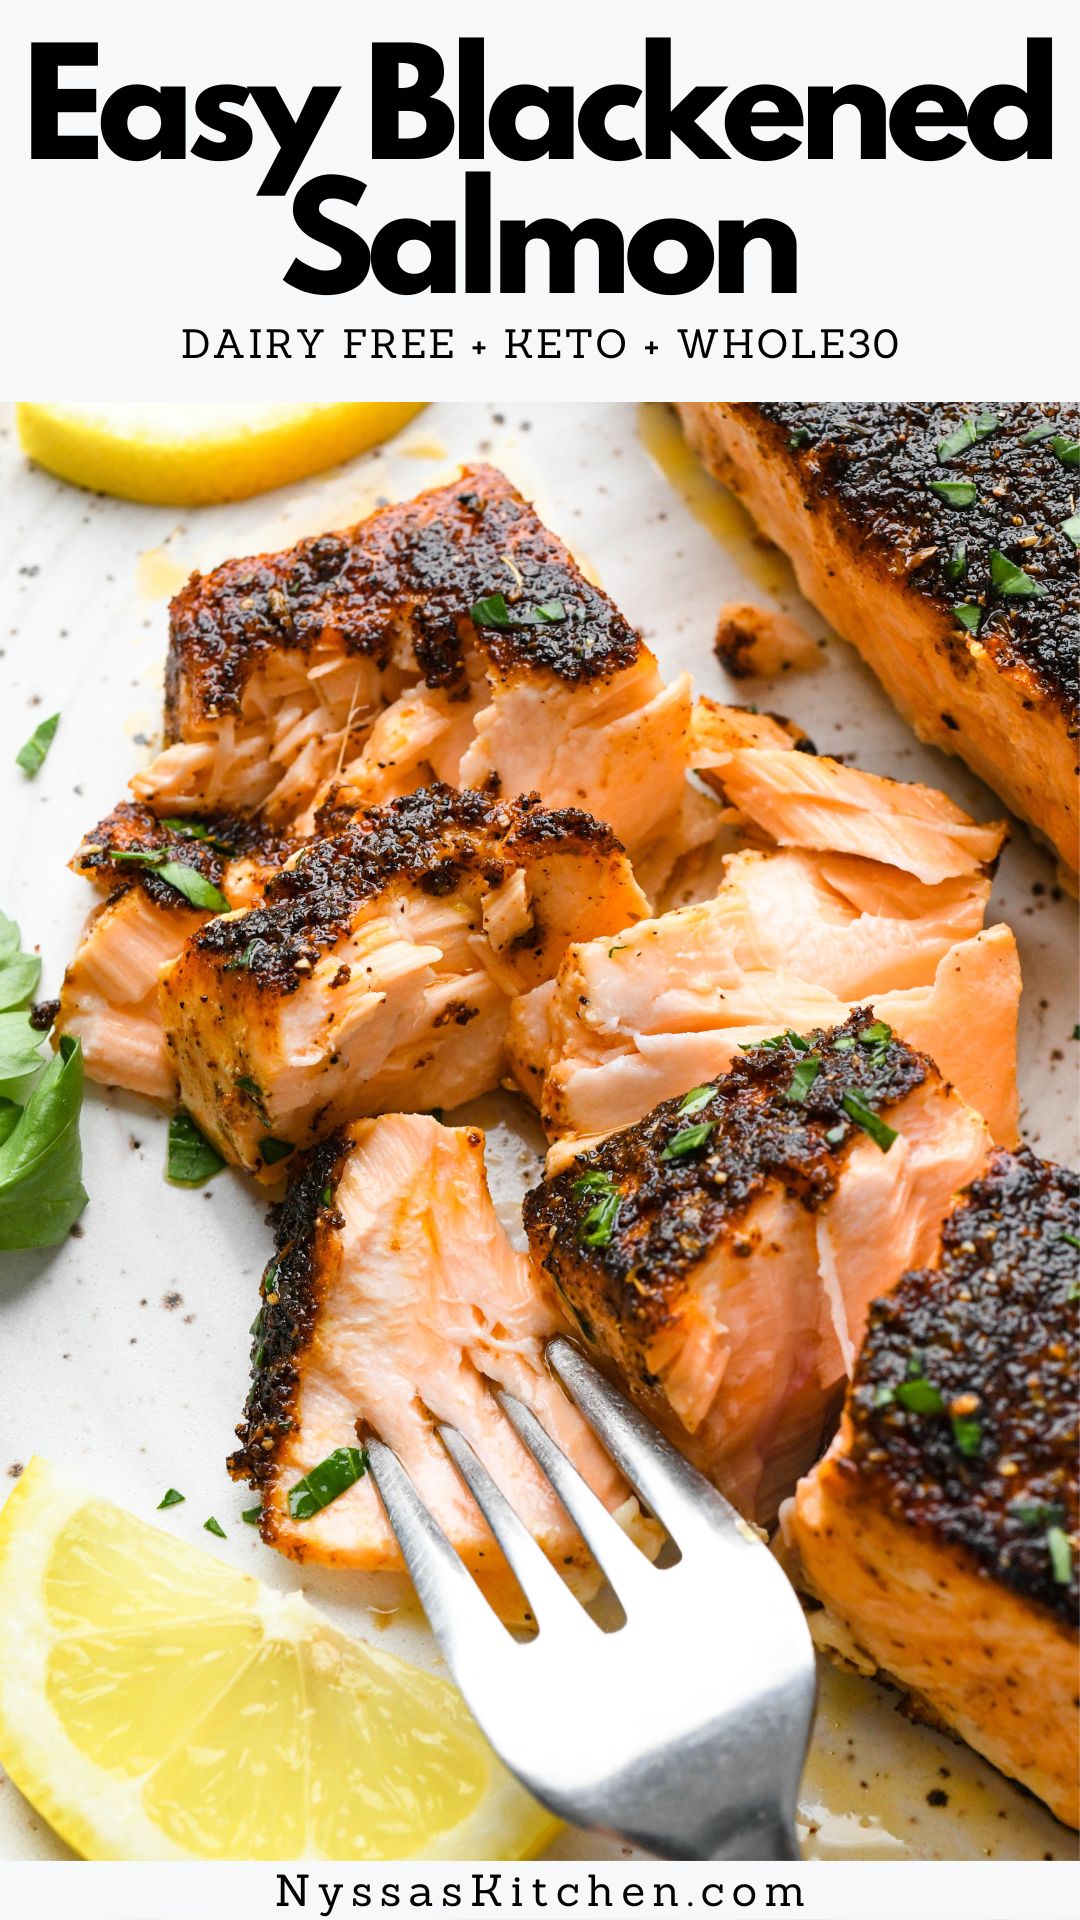 This blackened salmon is a bold and flavorful way to cook salmon for your next family dinner! Made with a simple homemade blackening seasoning and baked in the oven until perfectly cooked. The recipe makes two servings but can easily be doubled to serve four! Gluten free, dairy free, Whole30, paleo, and keto friendly.